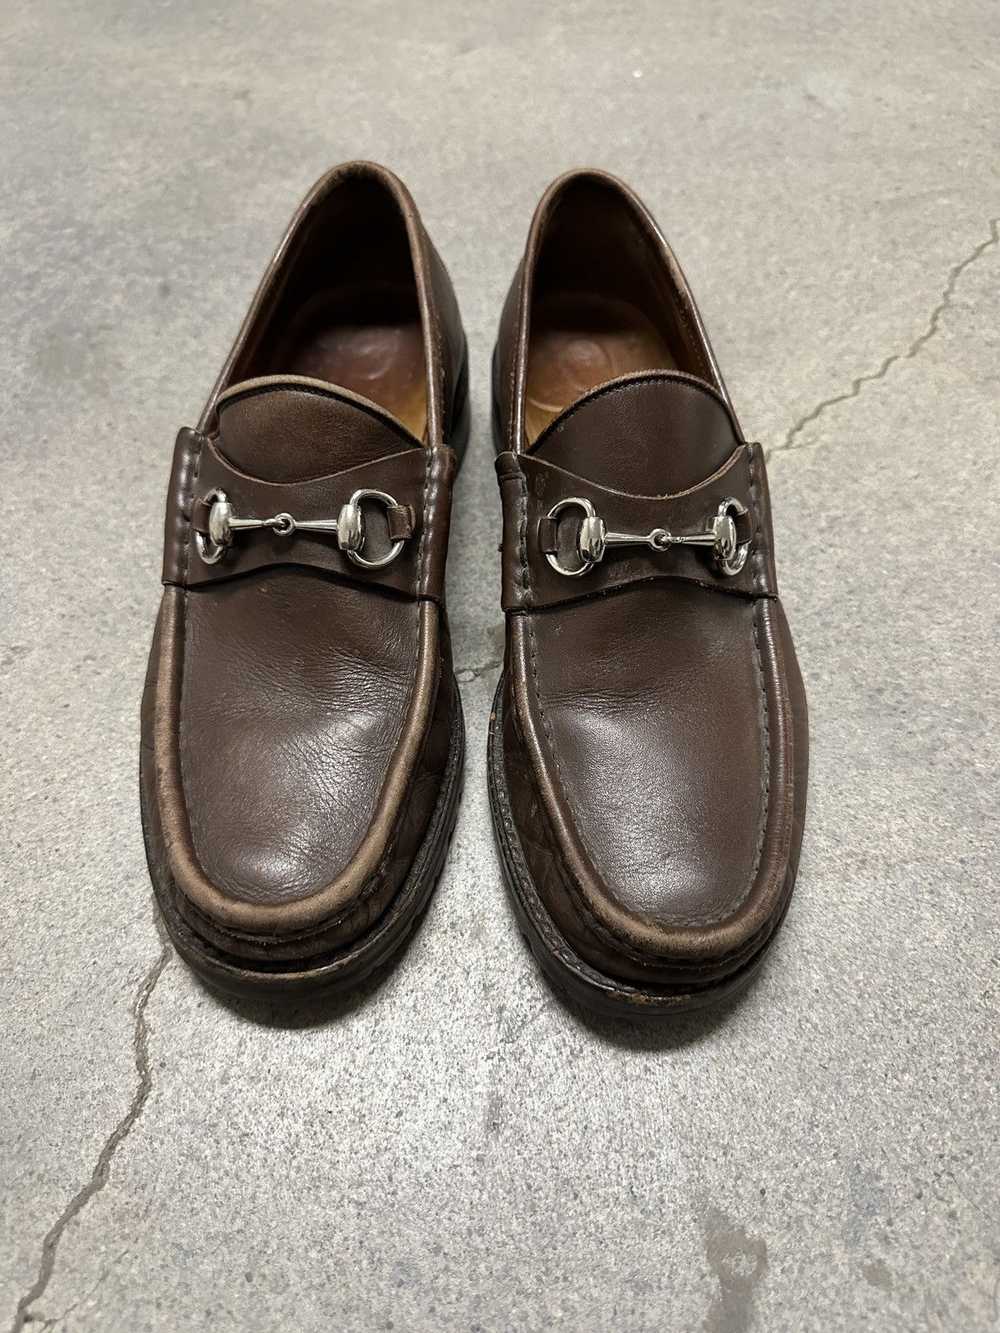 Gucci Gucci Loafer with Horsebit Size 9 - image 2